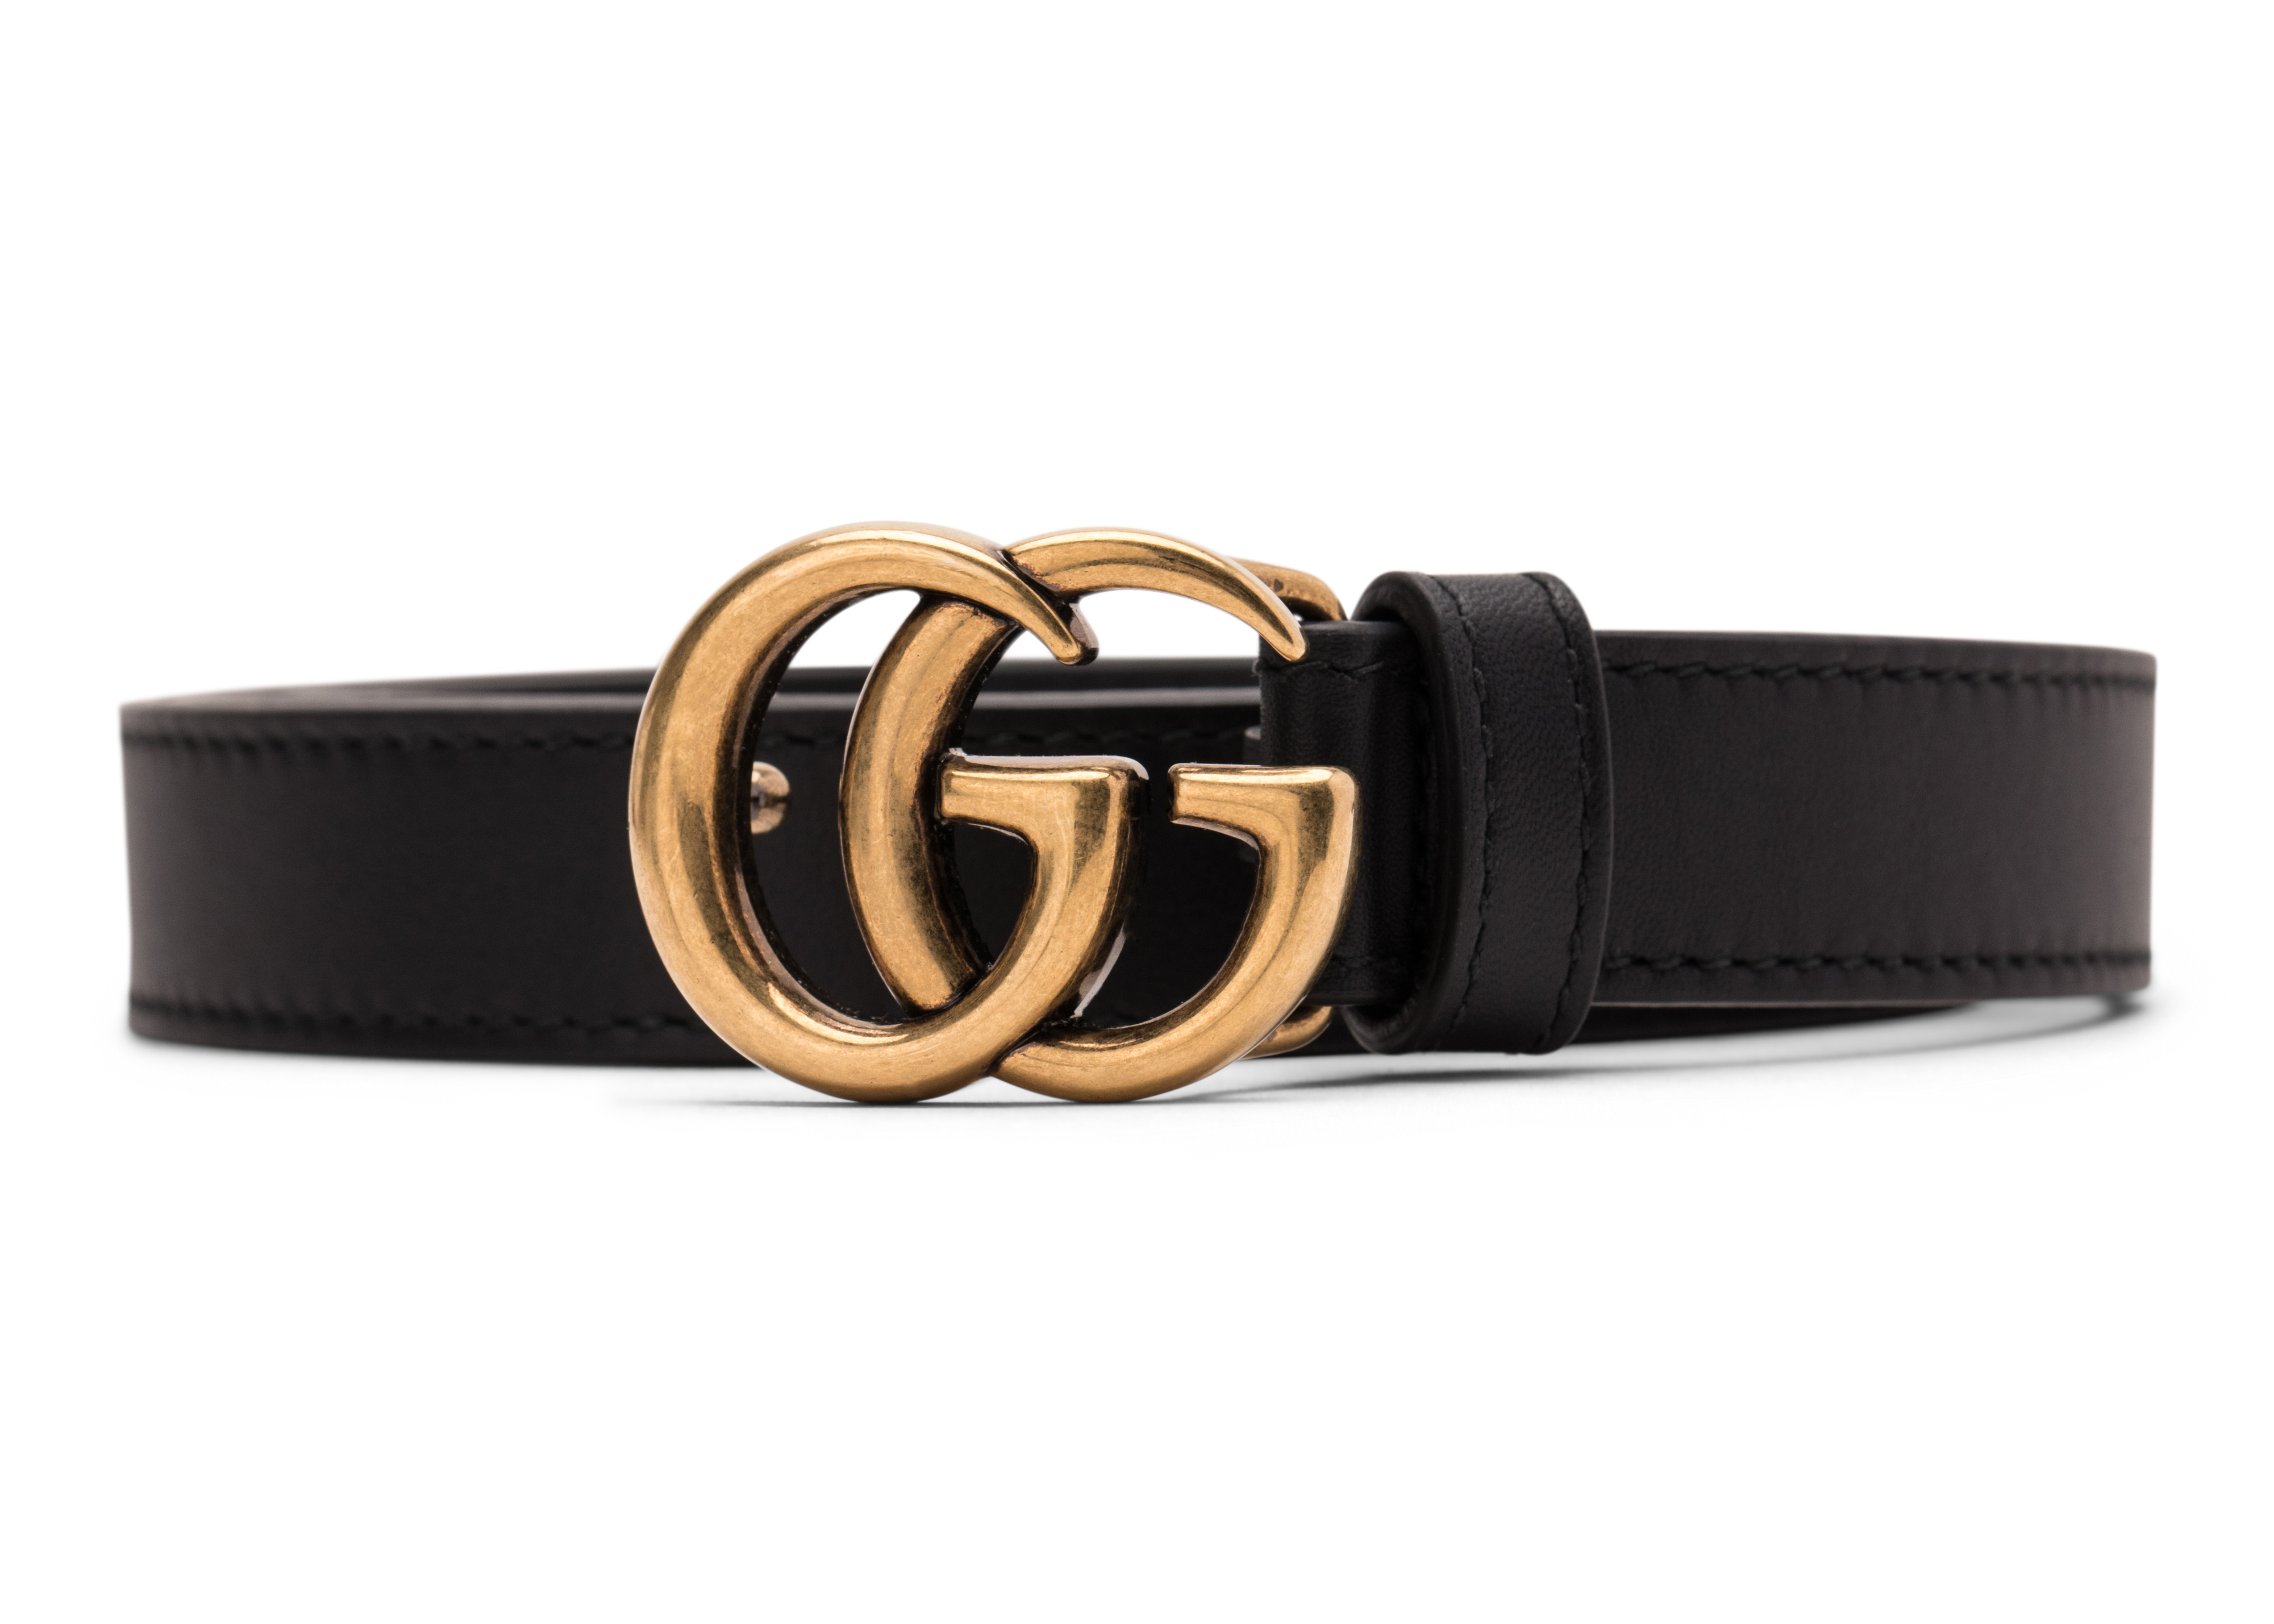 Buy Gucci Accessories - Featured - StockX